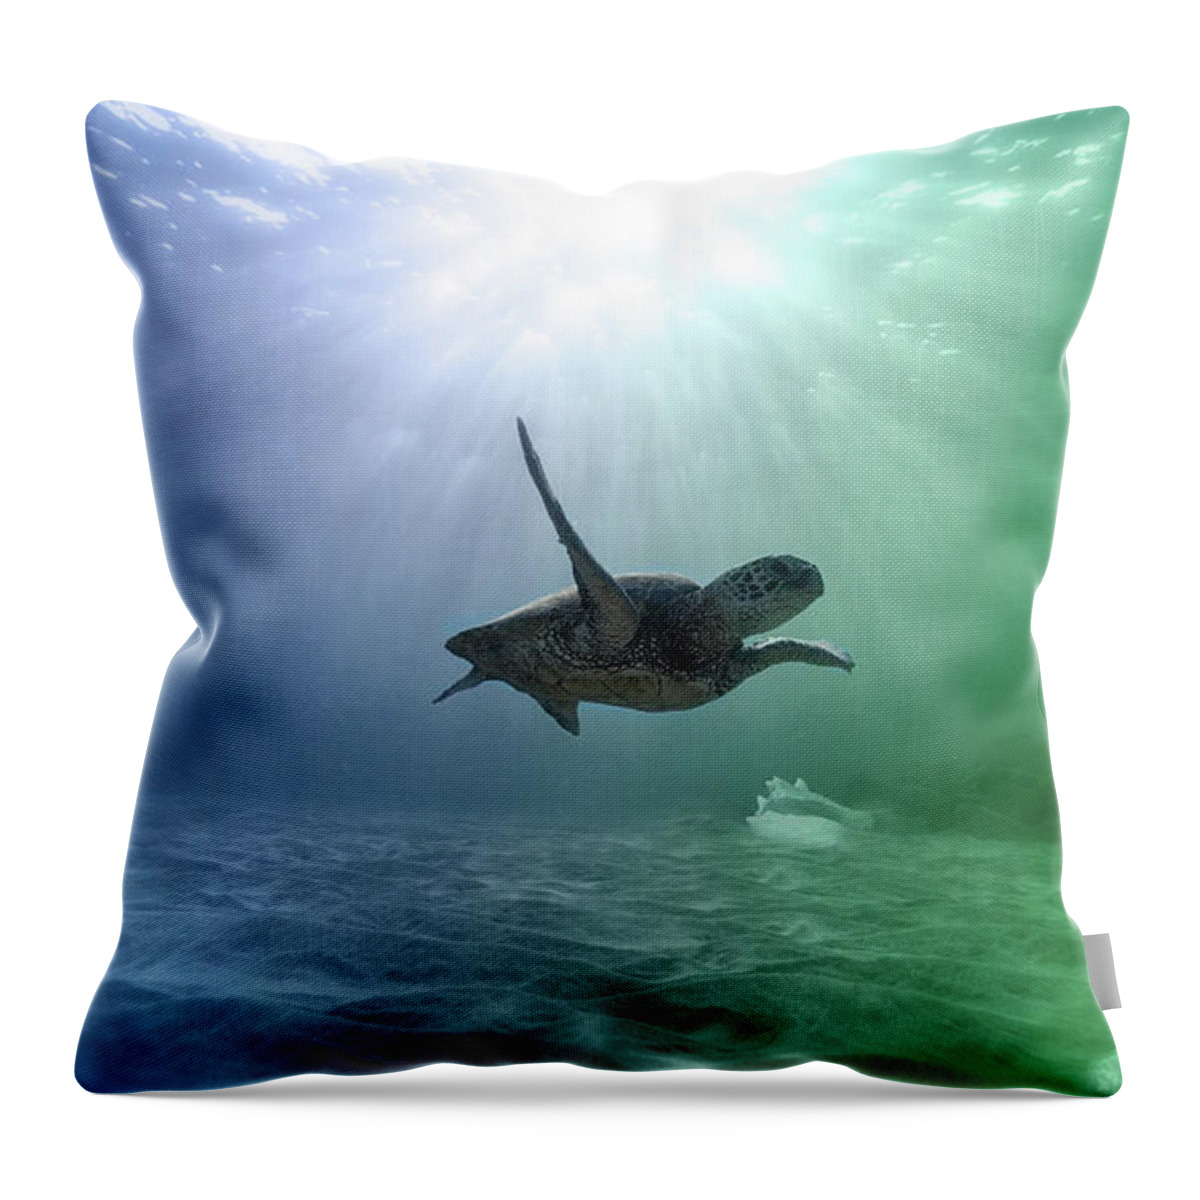 Underwater Throw Pillow featuring the photograph All Alone But Oh So Happy by Johanna Hurmerinta